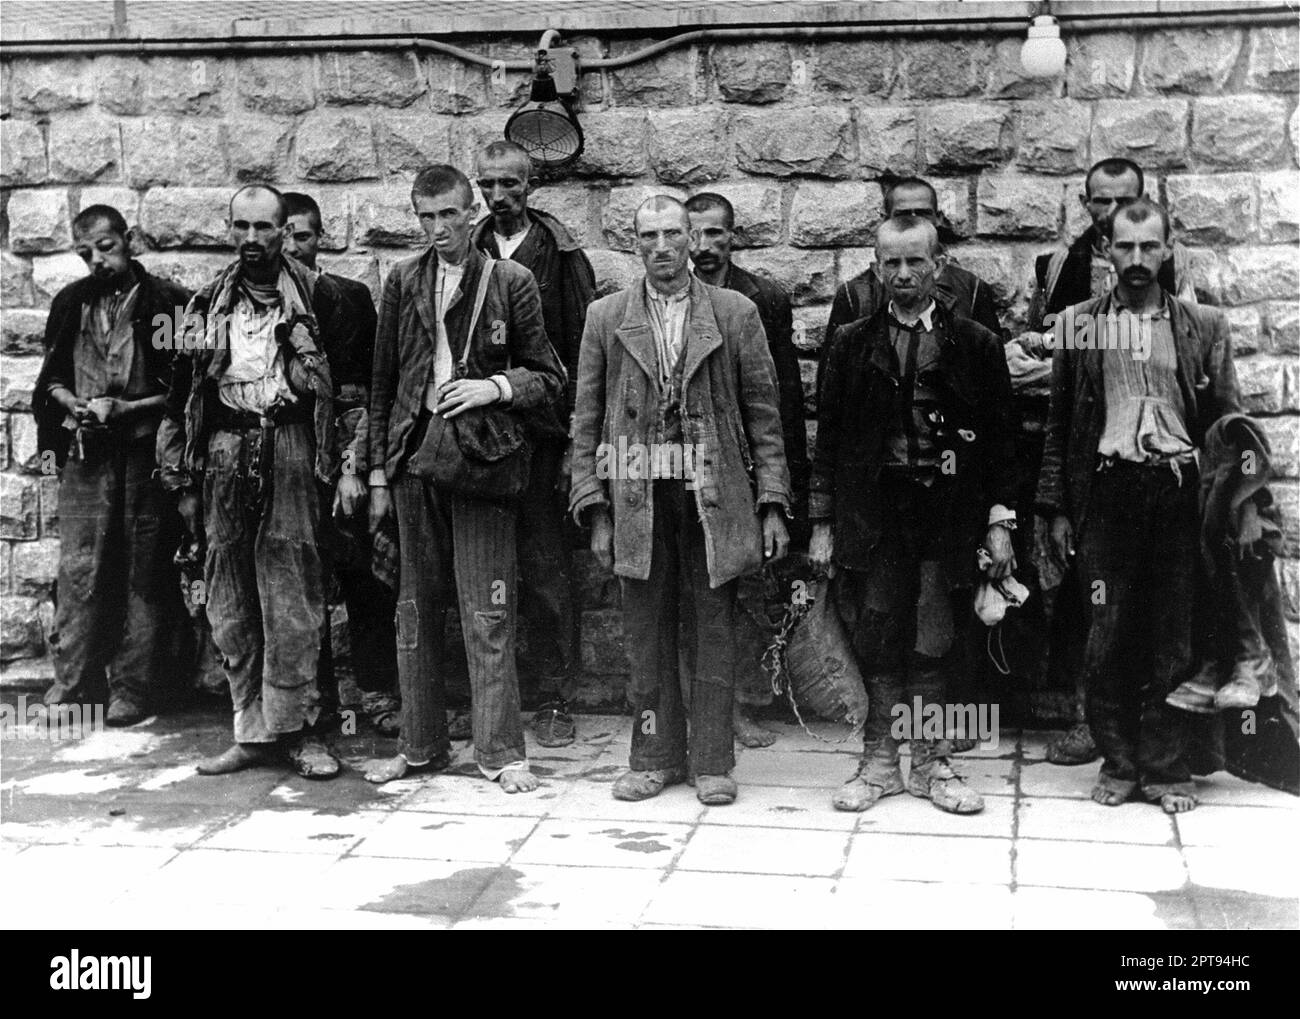 New arrivals to Mauthausen concentration camp standing against a wall. They survived weeklong trip in open railway cars. Stock Photo